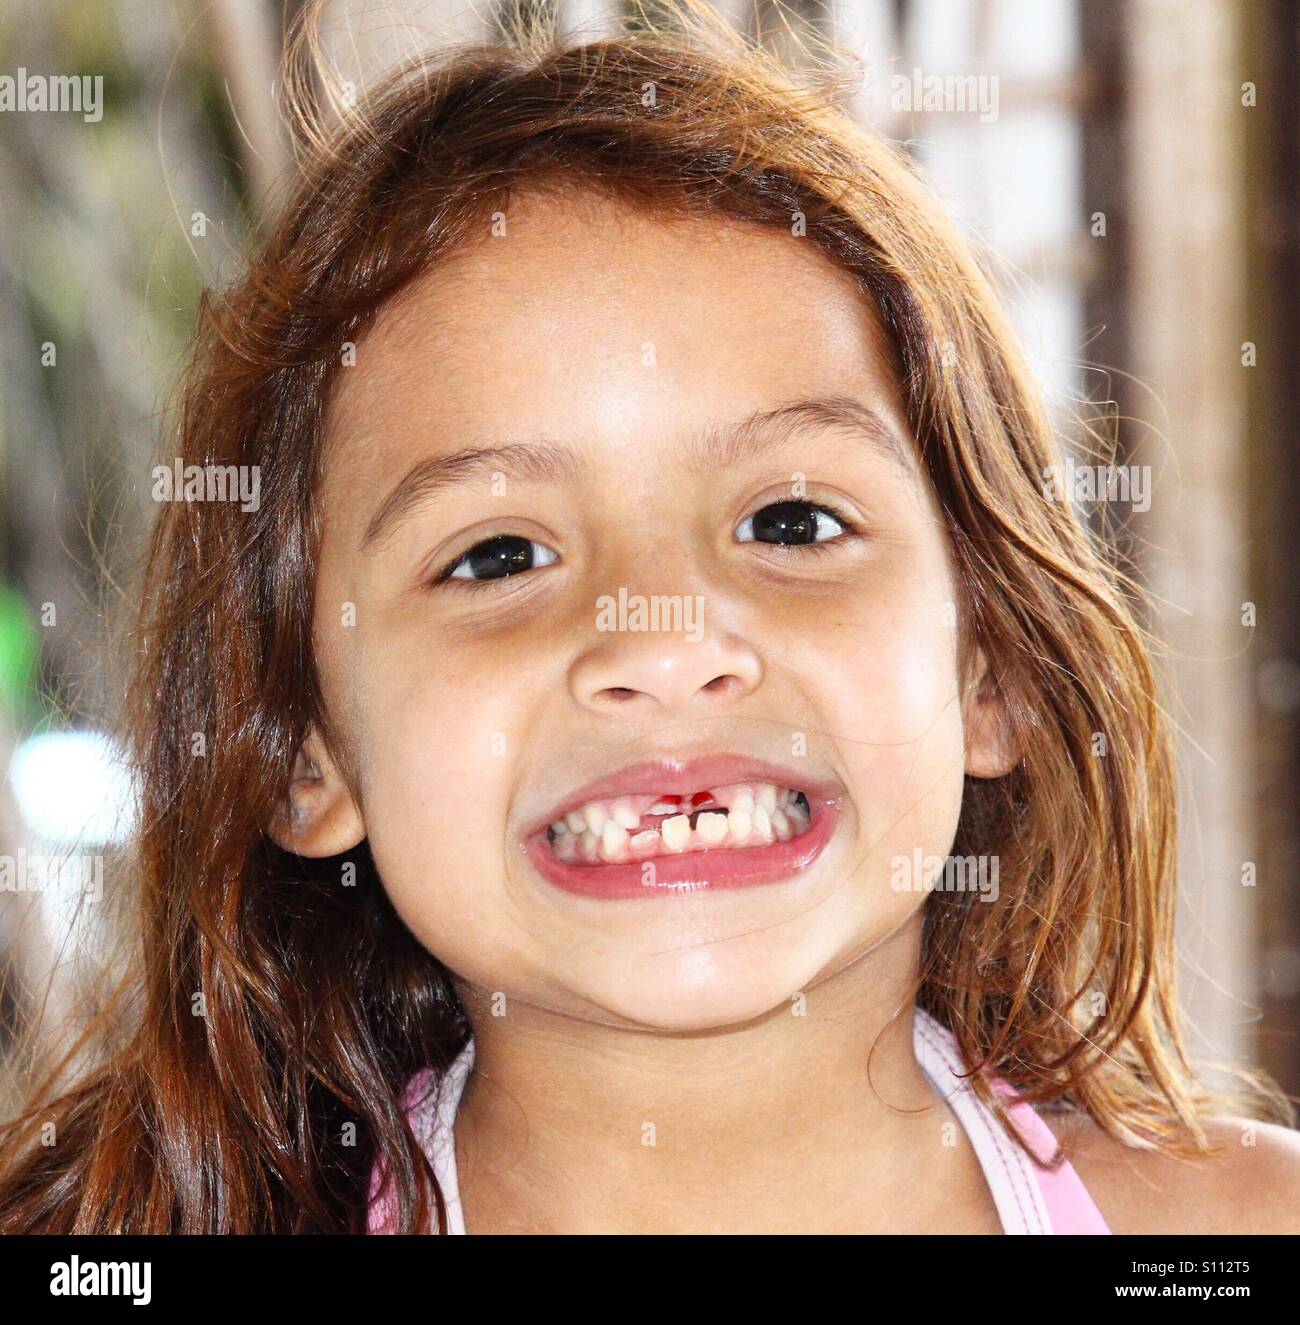 Little Girl Missing Front Tooth